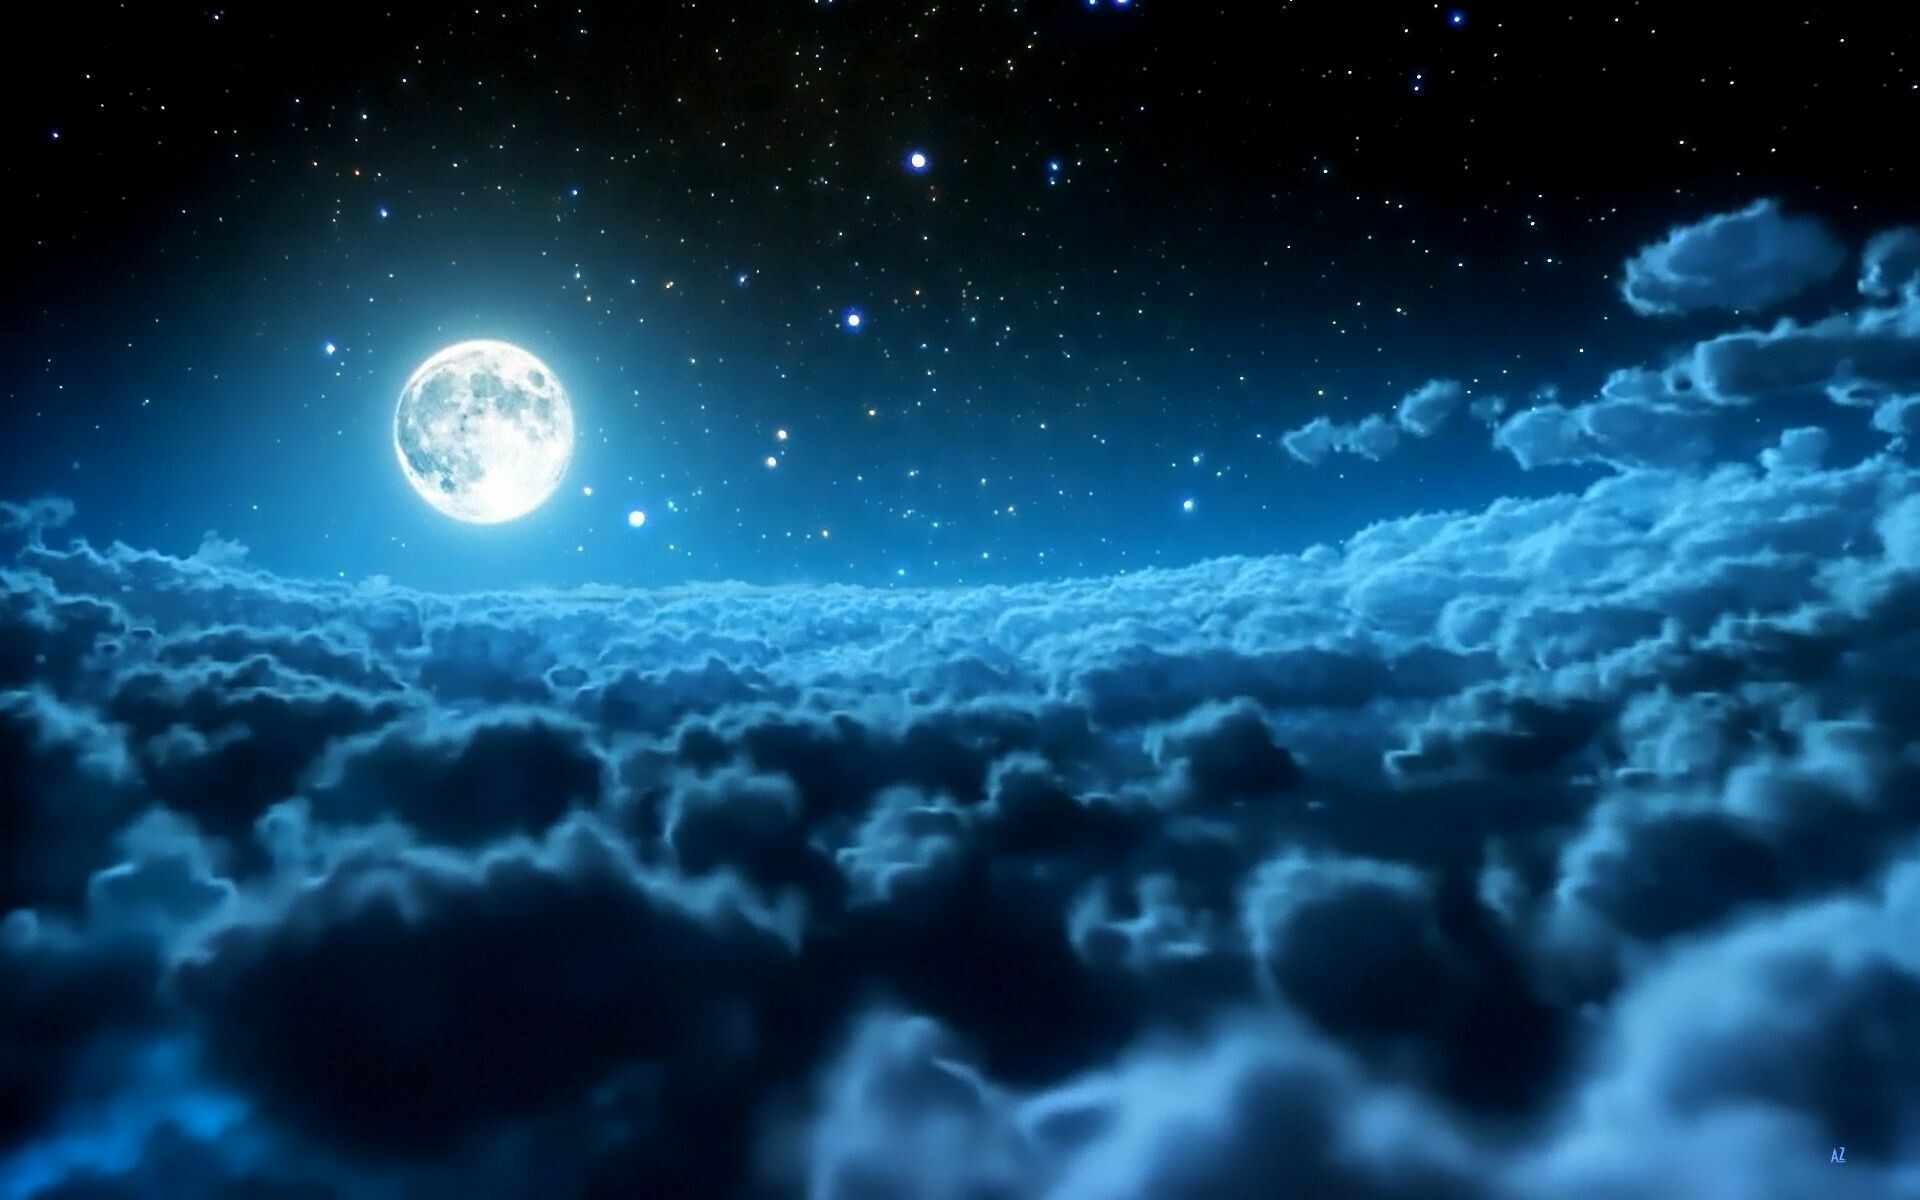 Moonlight: Moon illuminating the tops of clouds, Astronomical object. 1920x1200 HD Wallpaper.